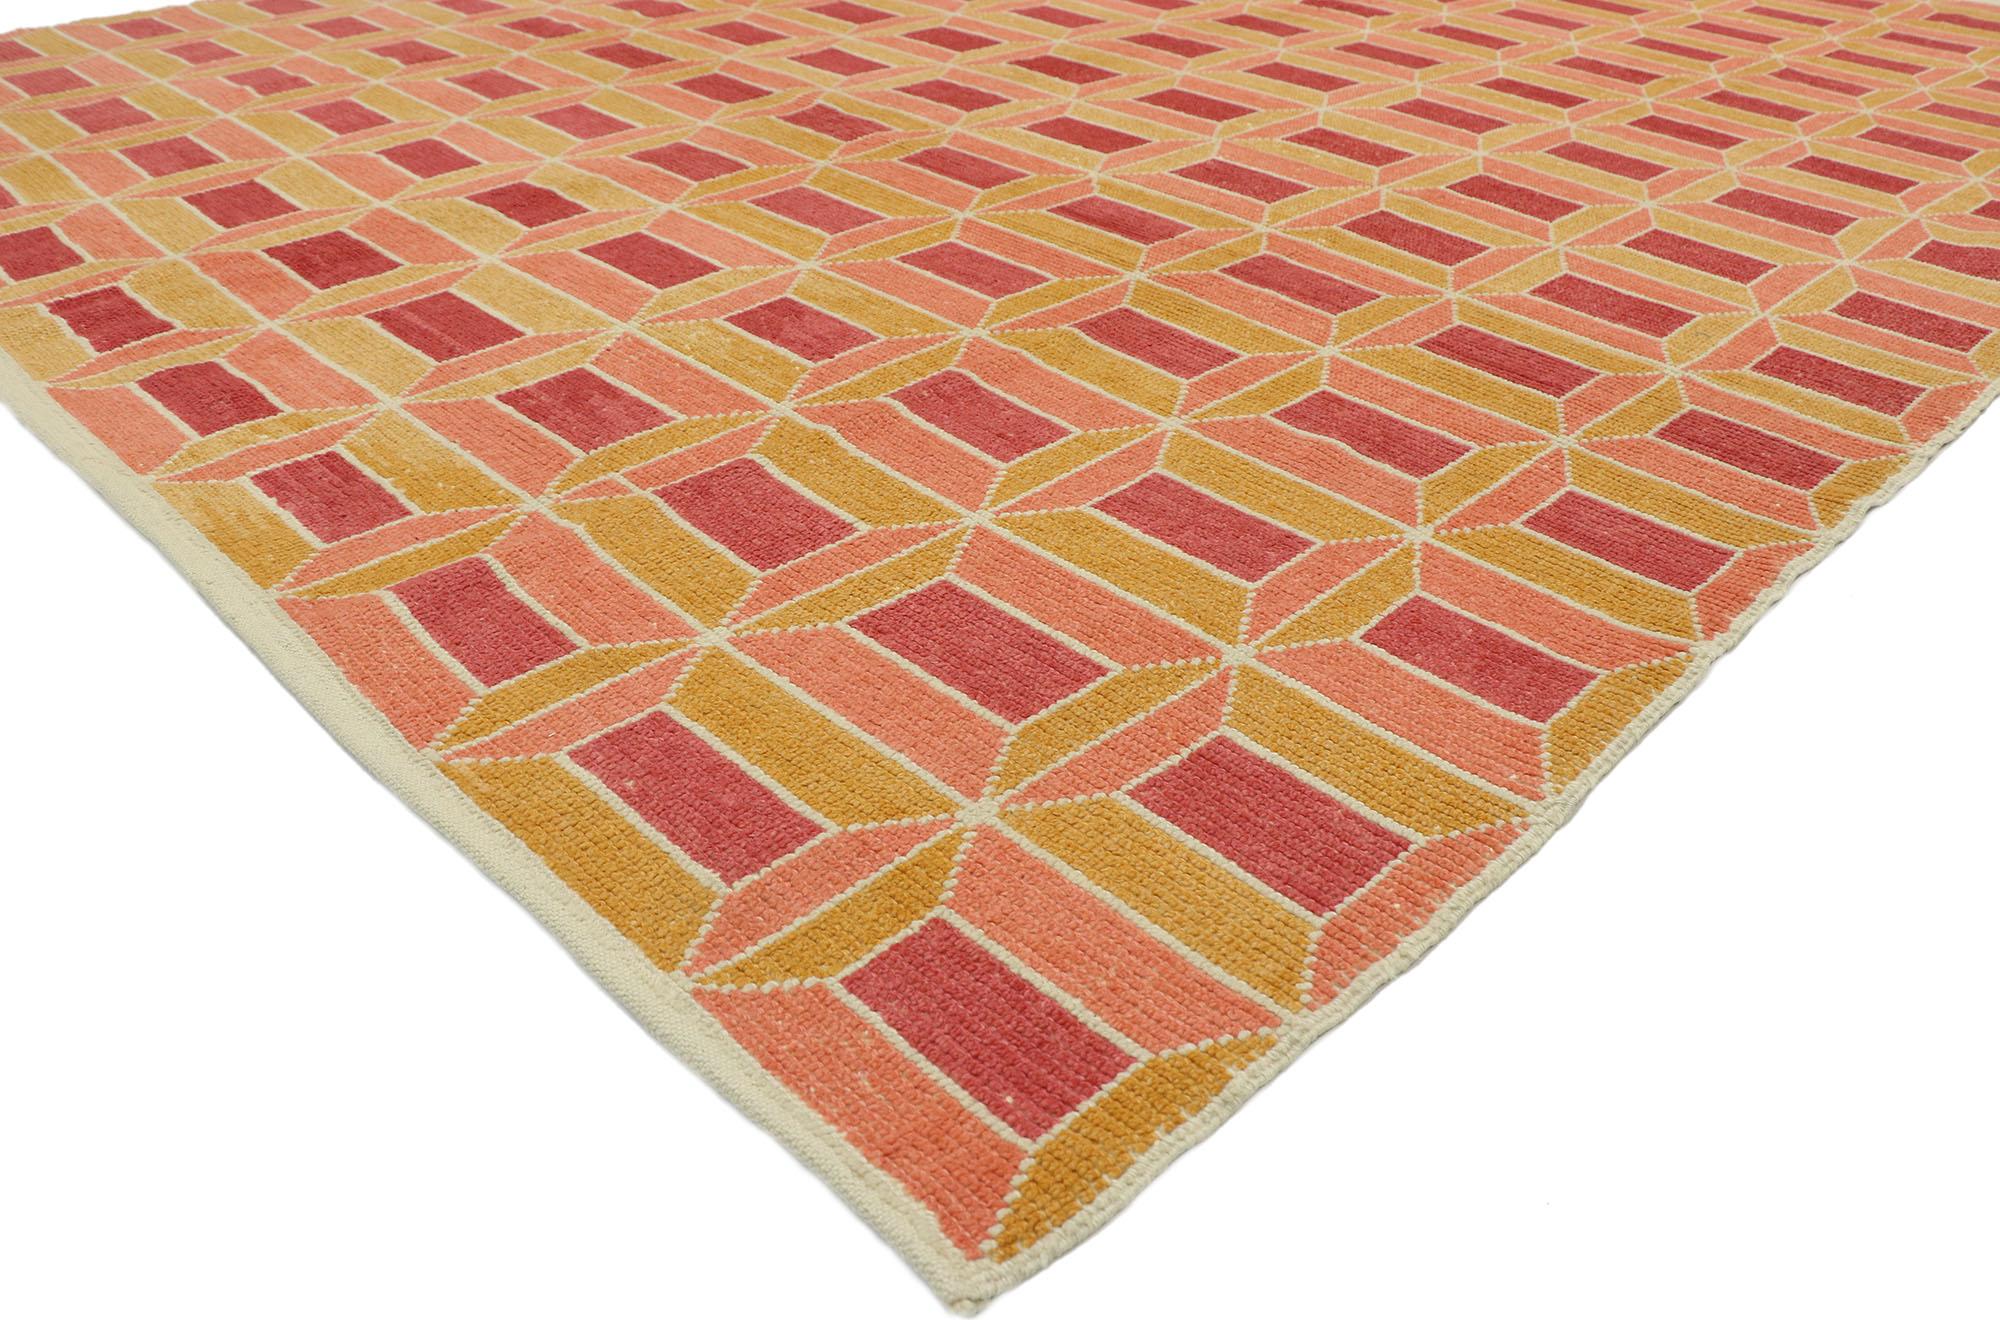 Post-Modern New Contemporary Moroccan Style Rug with Retro Postmodern Cubist Bauhaus Style For Sale